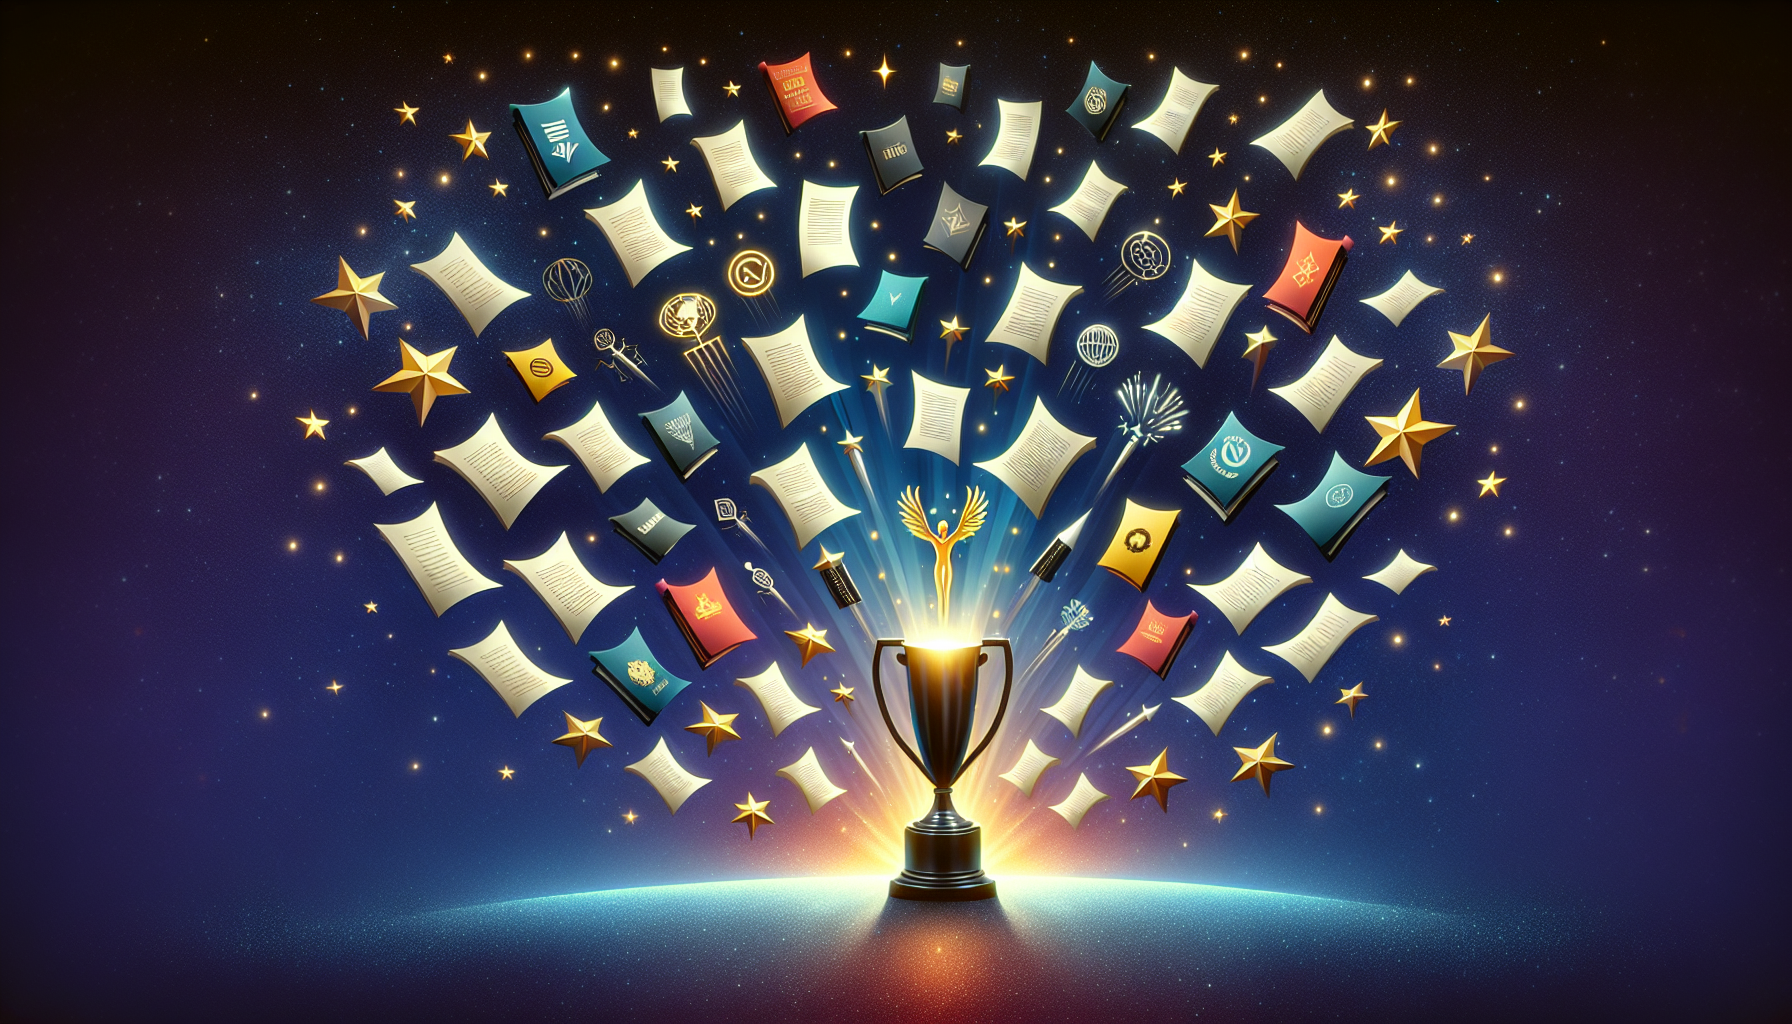 An illustration representing the top screenwriting contests of 2023. The scene should portray a cascade of diverse scripts tumbling down from a star studded sky, with each script being subtly marked by a unique emblem symbolizing the respective contest. There is a large, glossy trophy at the center of the scene glowing with potential victory. The design should be modern and dynamic with a variety of bright, resplendent colors bringing each script, emblem and the trophy to life.